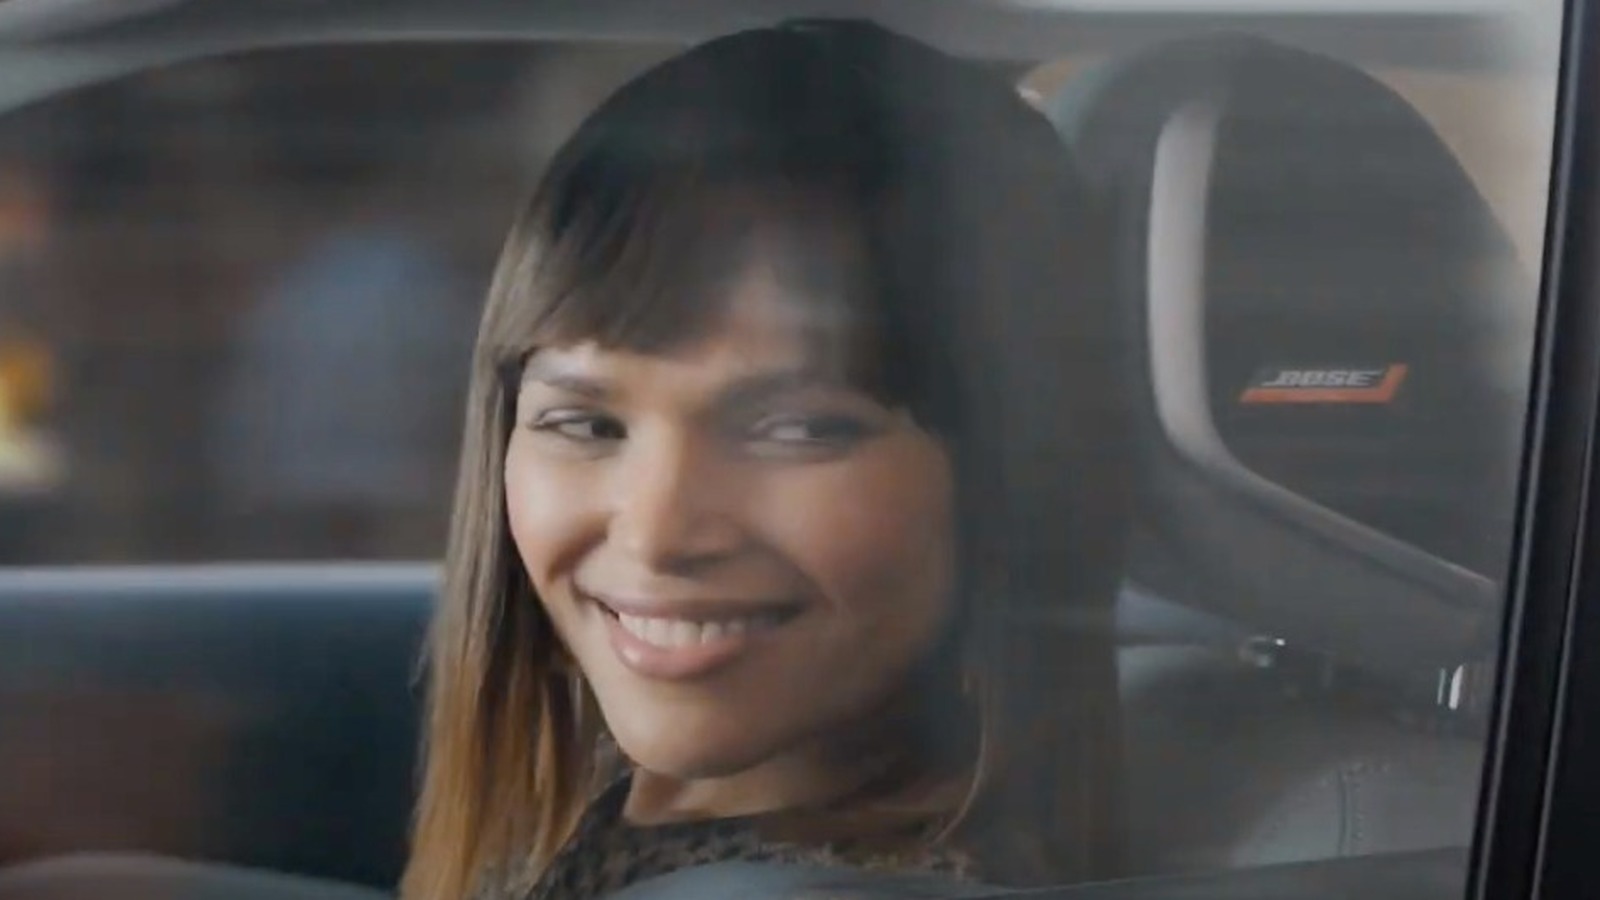 Nissan Commercial Actress / Surprise Feminism Inspires New Nissan Ad